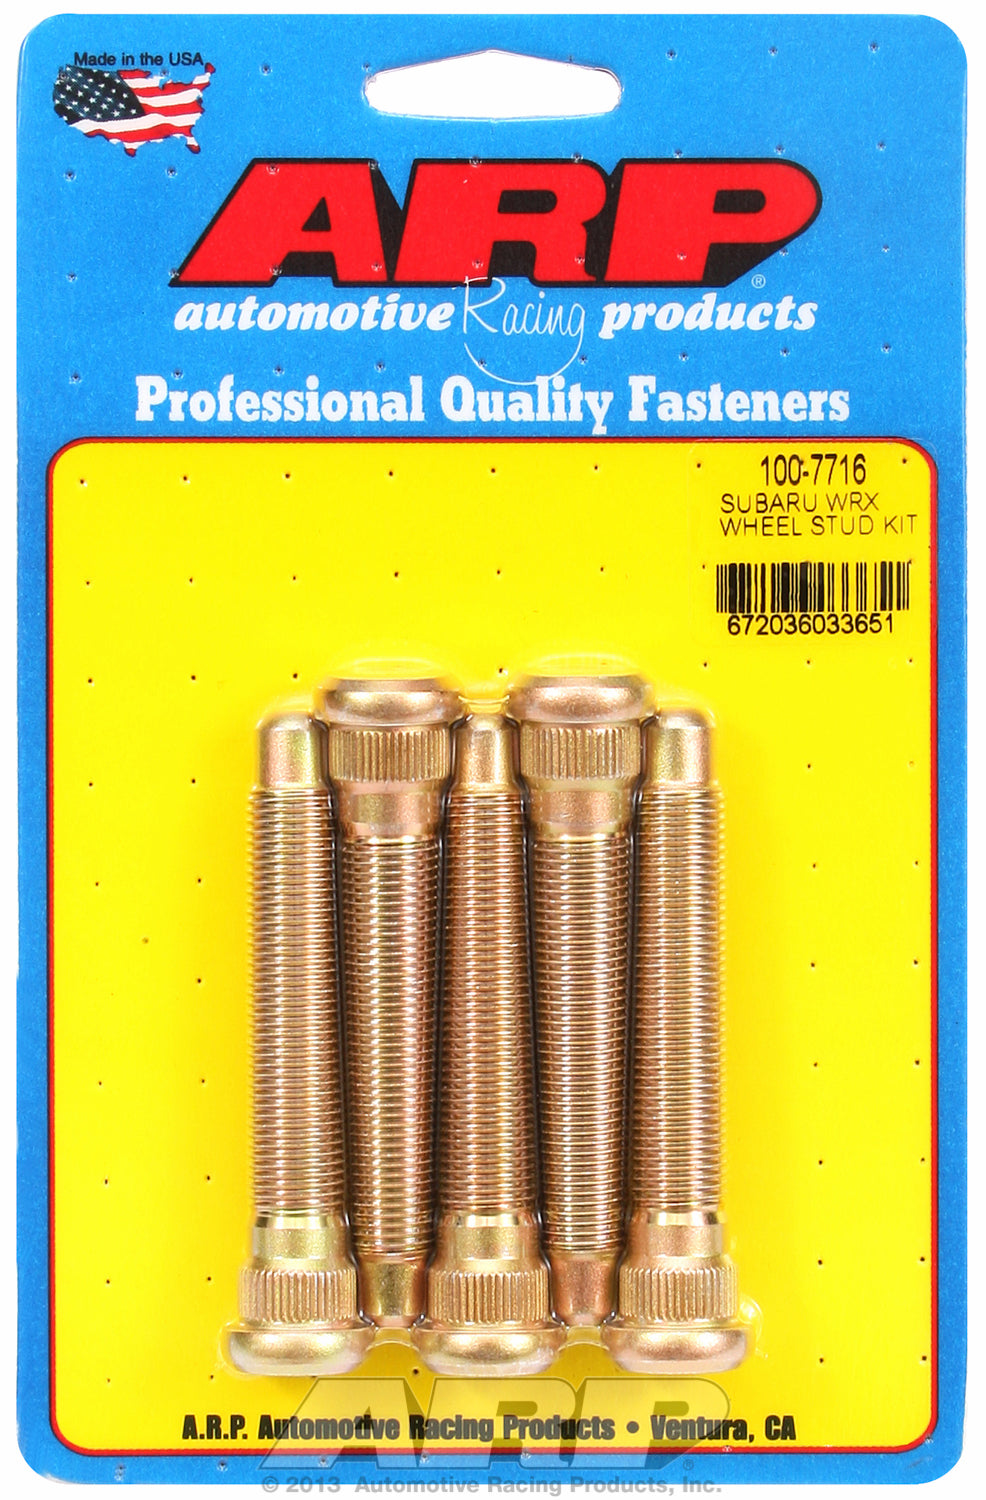 Wheel Stud Kit for Subaru BRZ & WRX (extended length with nose)